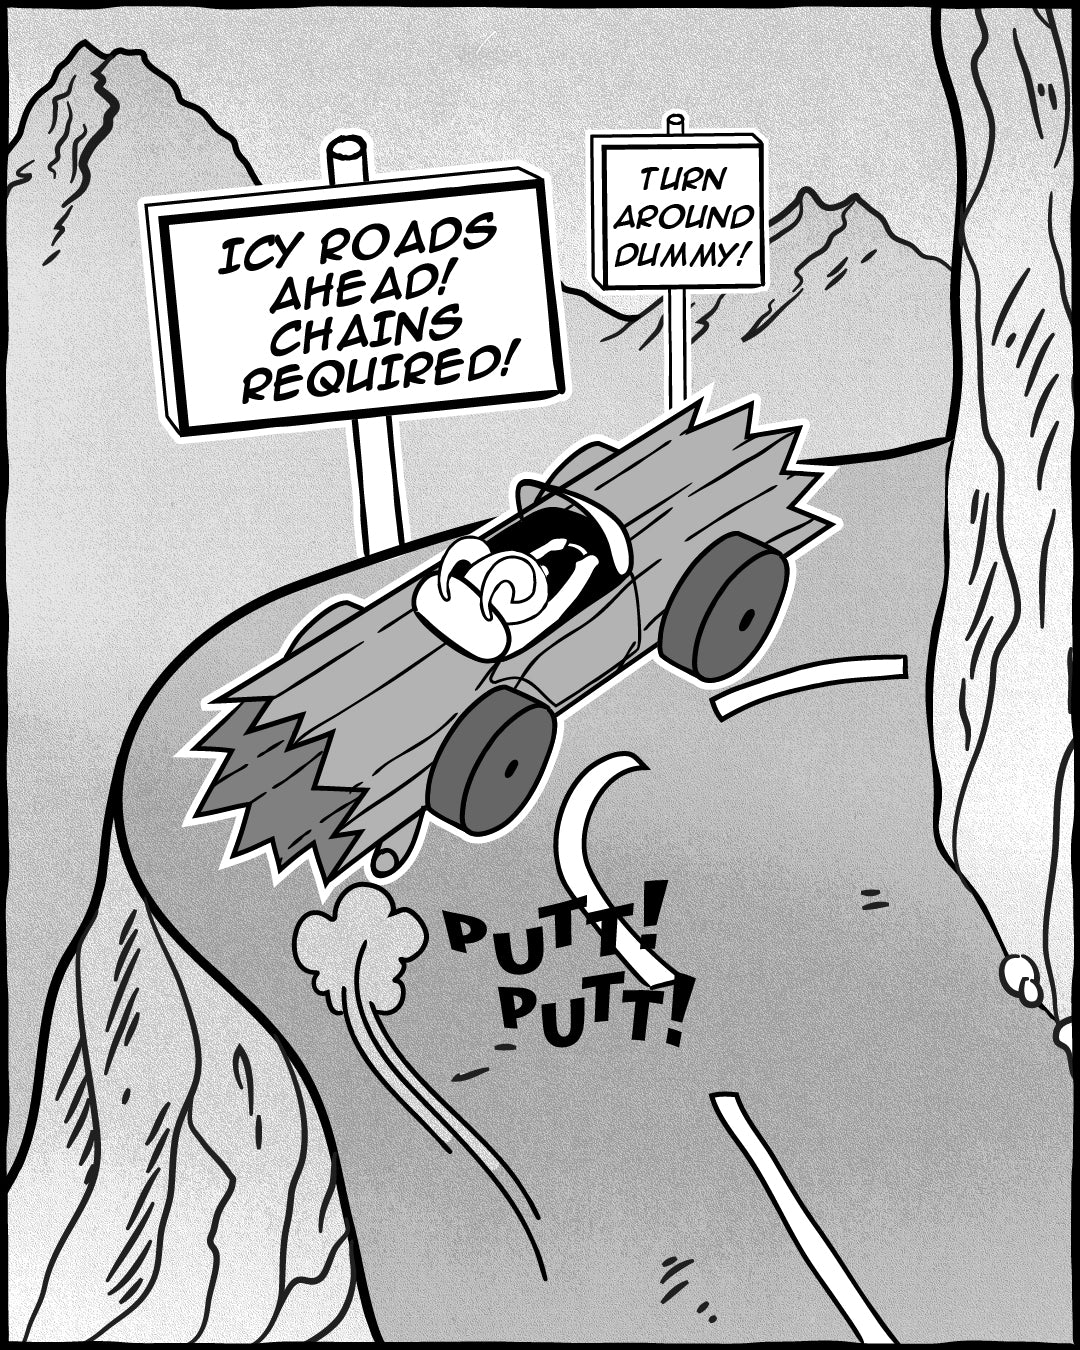 Mountain Road - No Chains, Snow Problem, The Adventures Of Lambert Comic Series | TRVRS Outdoors